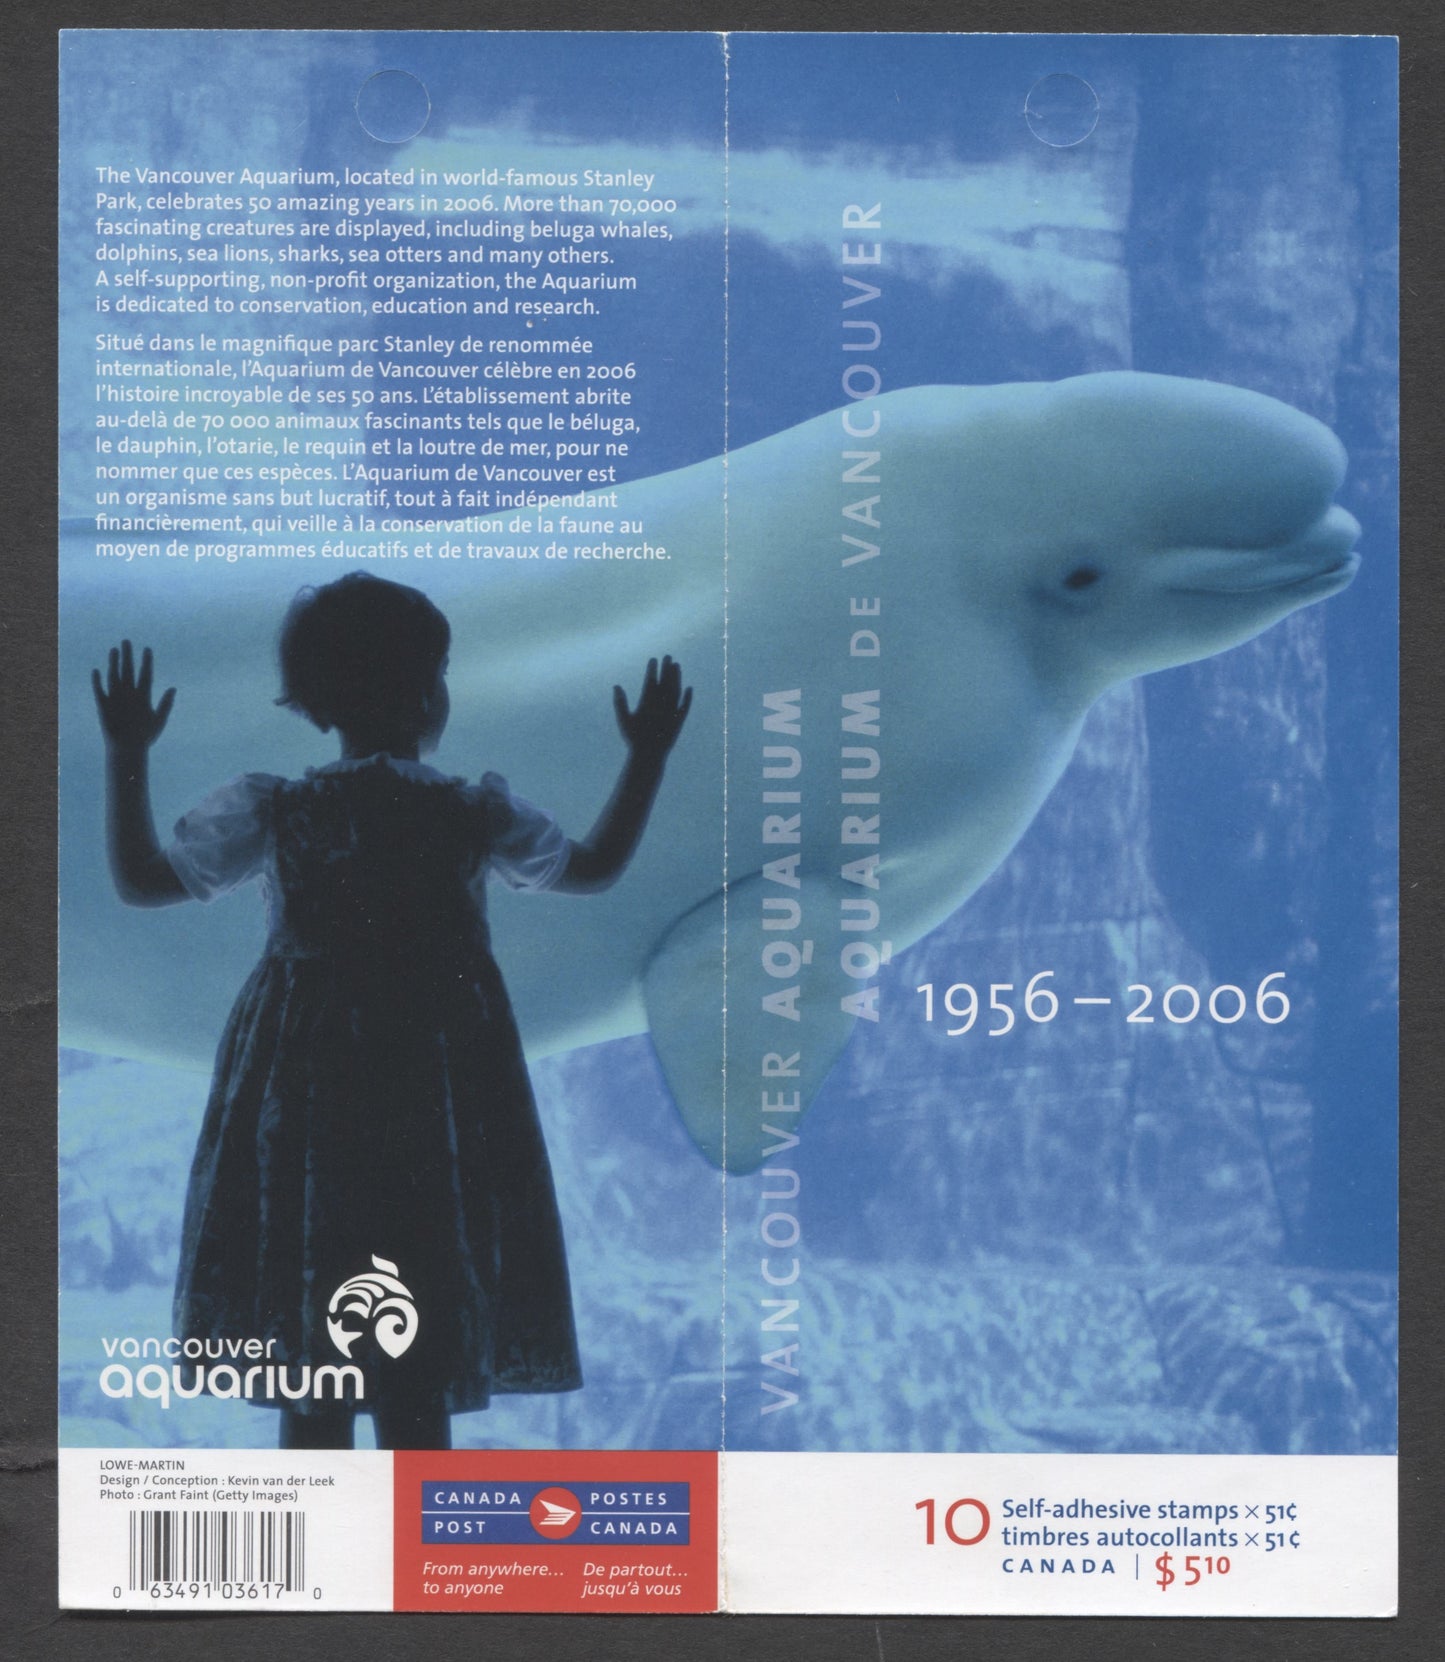 Canada #BK330 2006 Vancouver Aquarium Issue, Complete $5.10 Booklet, Tullis Russell Coatings Paper, Dead Paper, 4 mm GT-4 Tagging